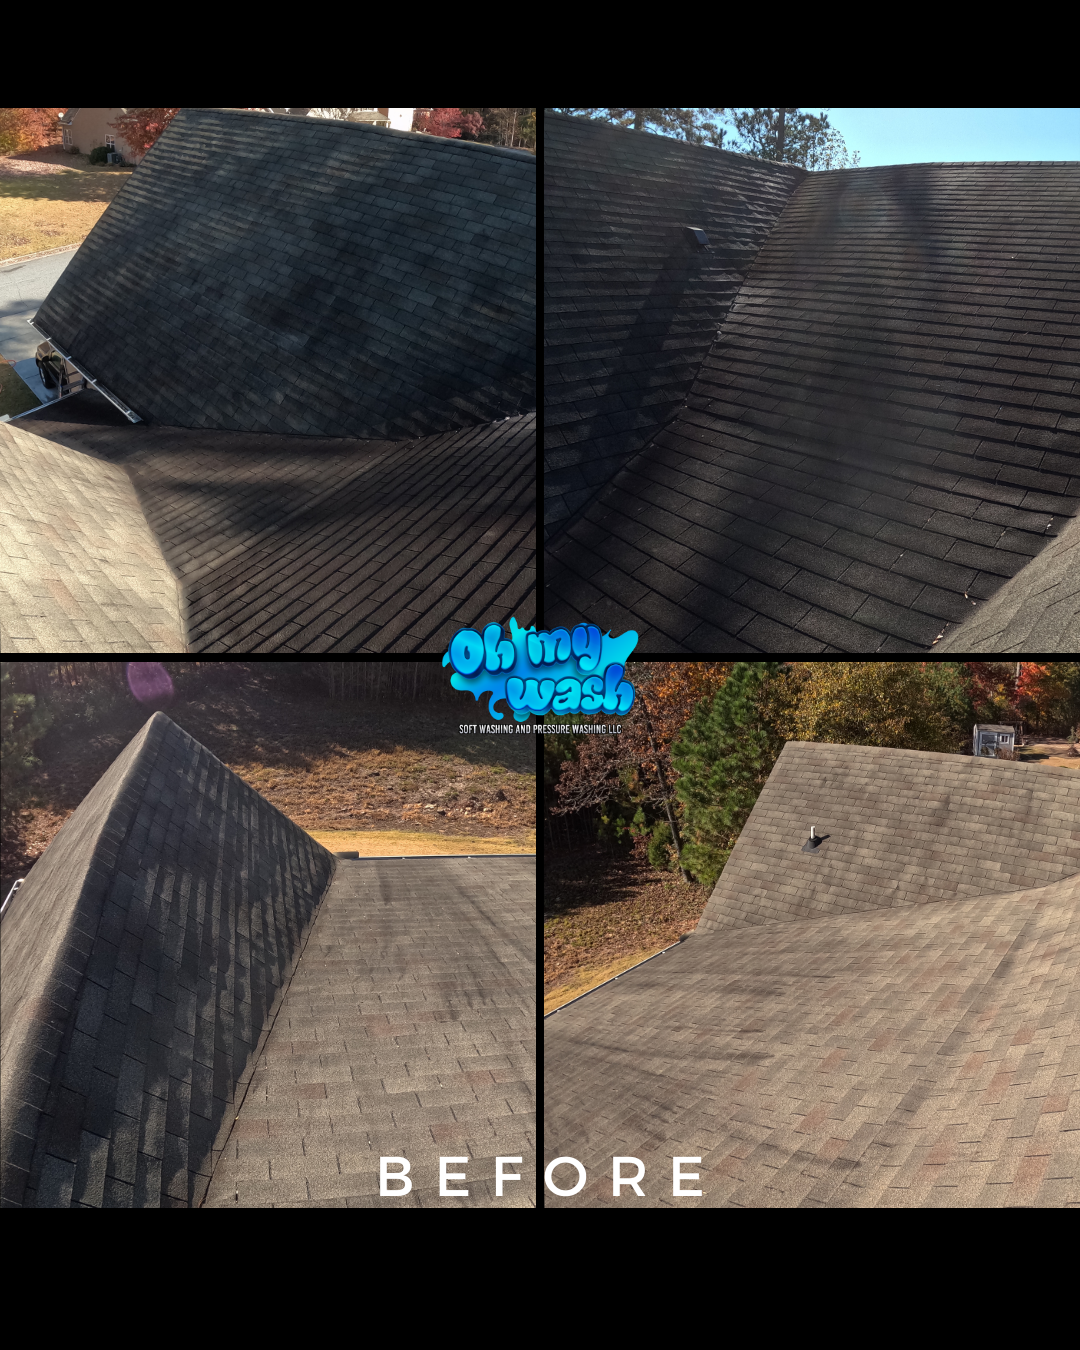 Powder Springs' Best Roof Wash - Brighten Your Home Now!